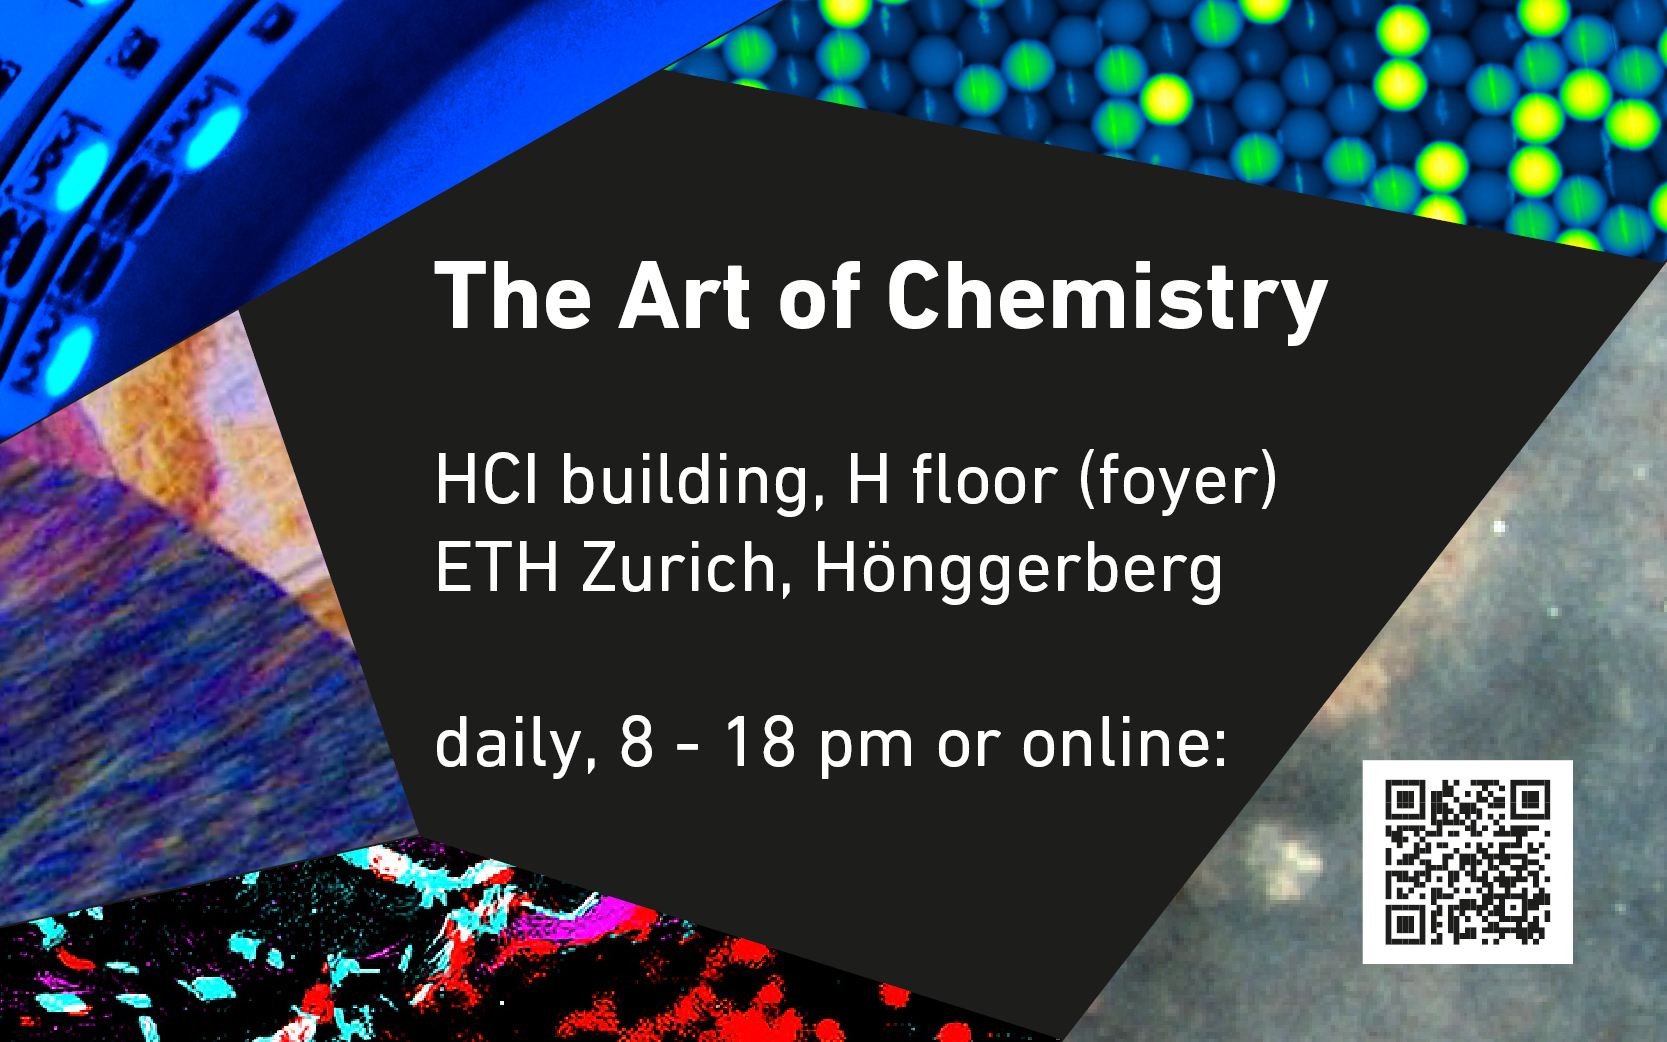 Button to the Art of Chemistry exhibition online